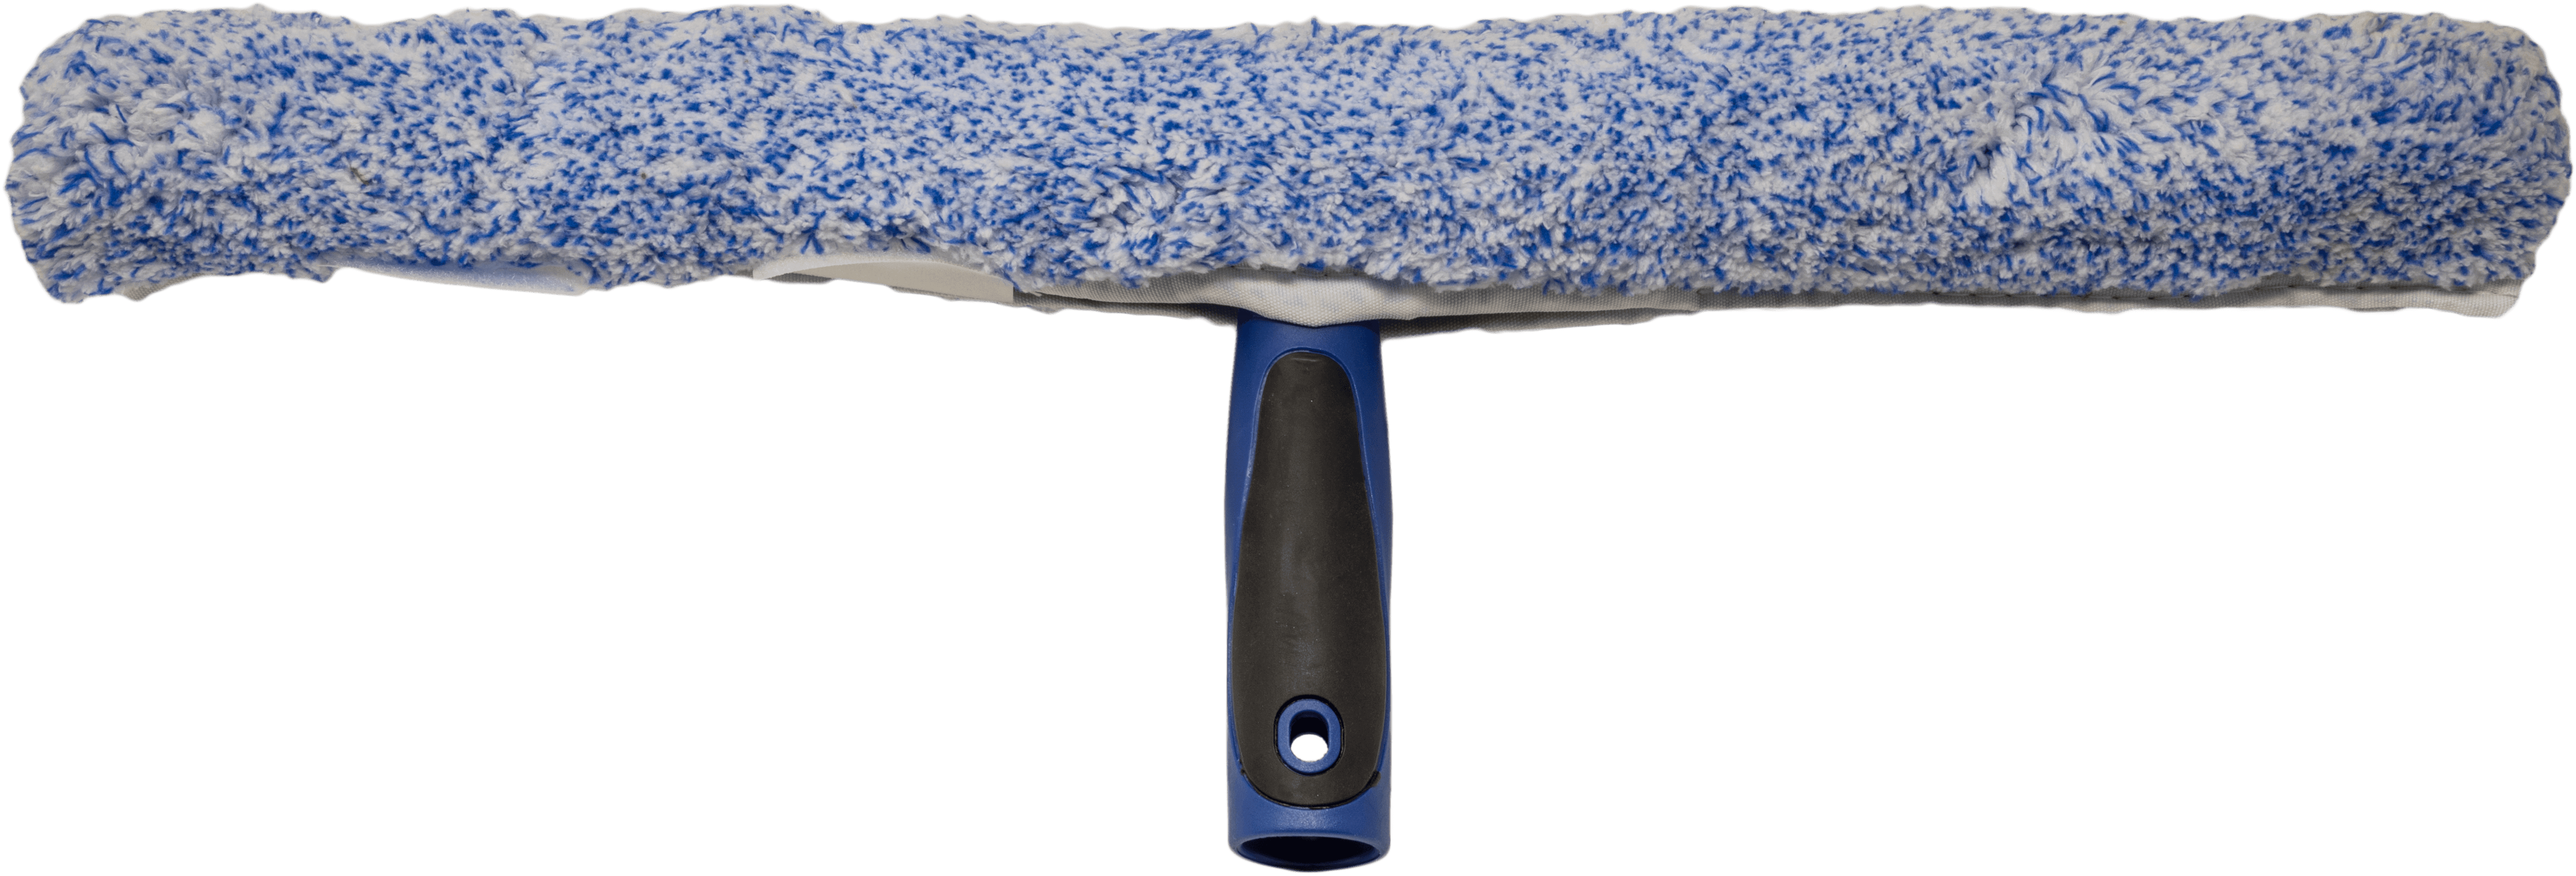 QUICK-CLEAN TABLE WIPER USE WITH PRODUCT